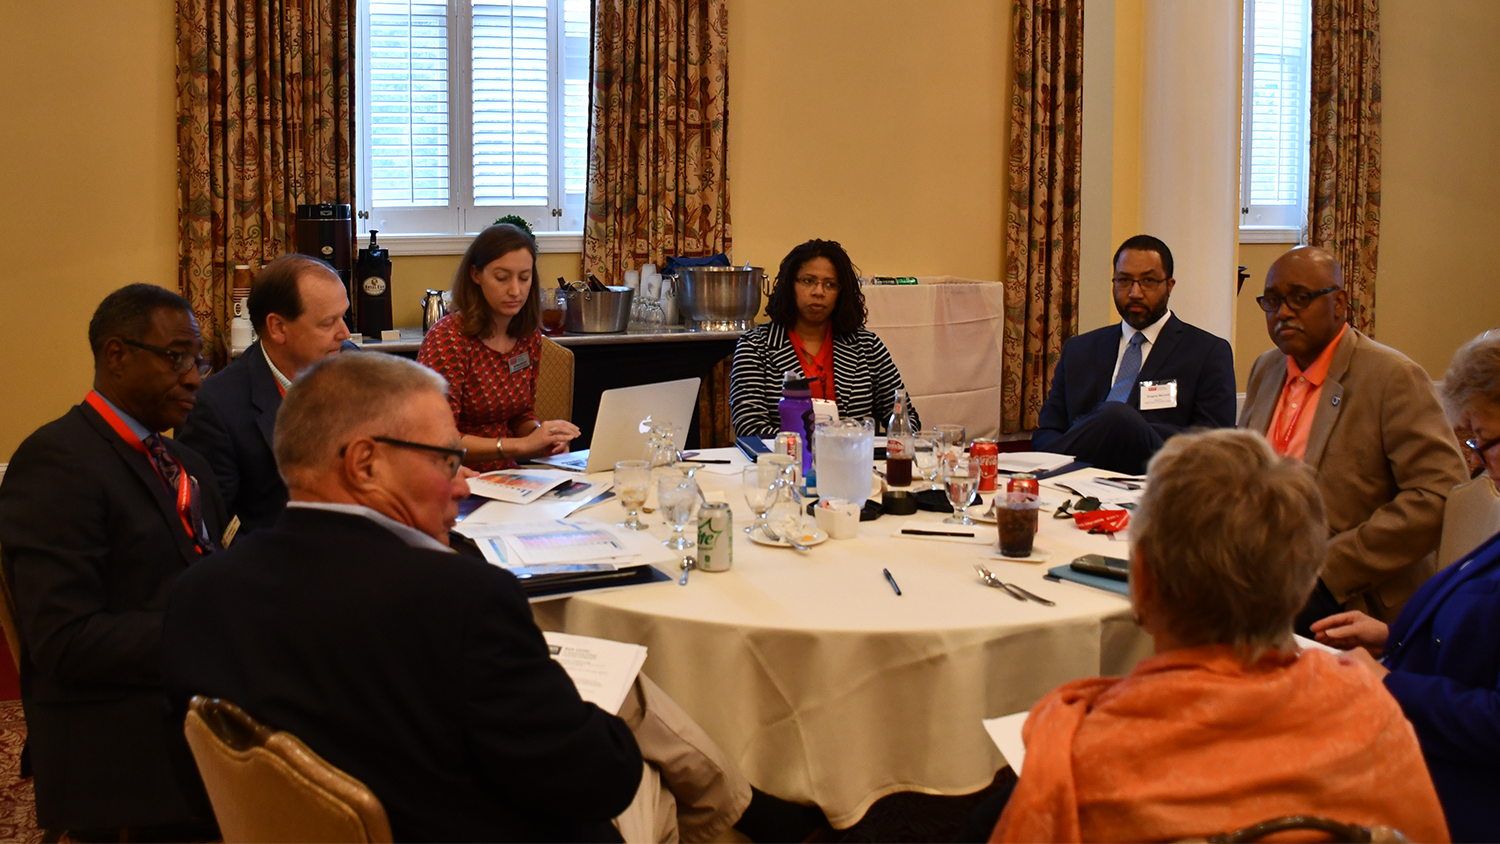 A group of community college presidents discuss data at the Belk Center Presidents' Academy Symposium on Sept. 9, 2019